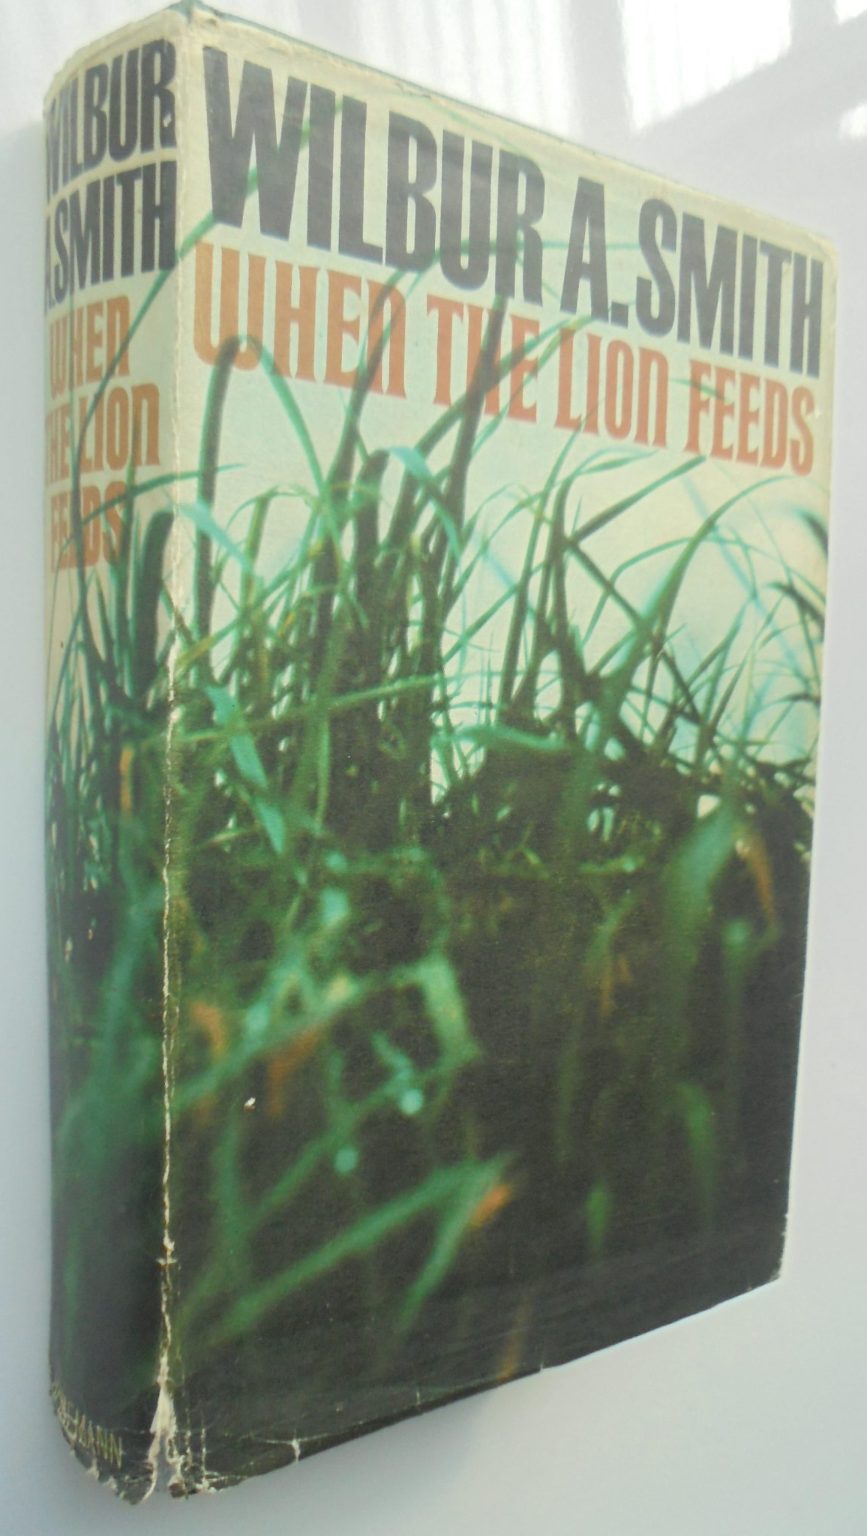 When the Lion Feeds By Wilbur A. Smith. TRUE FIRST EDITION. SCARCE FIRST EDITION OF HIS FIRST NOVEL.